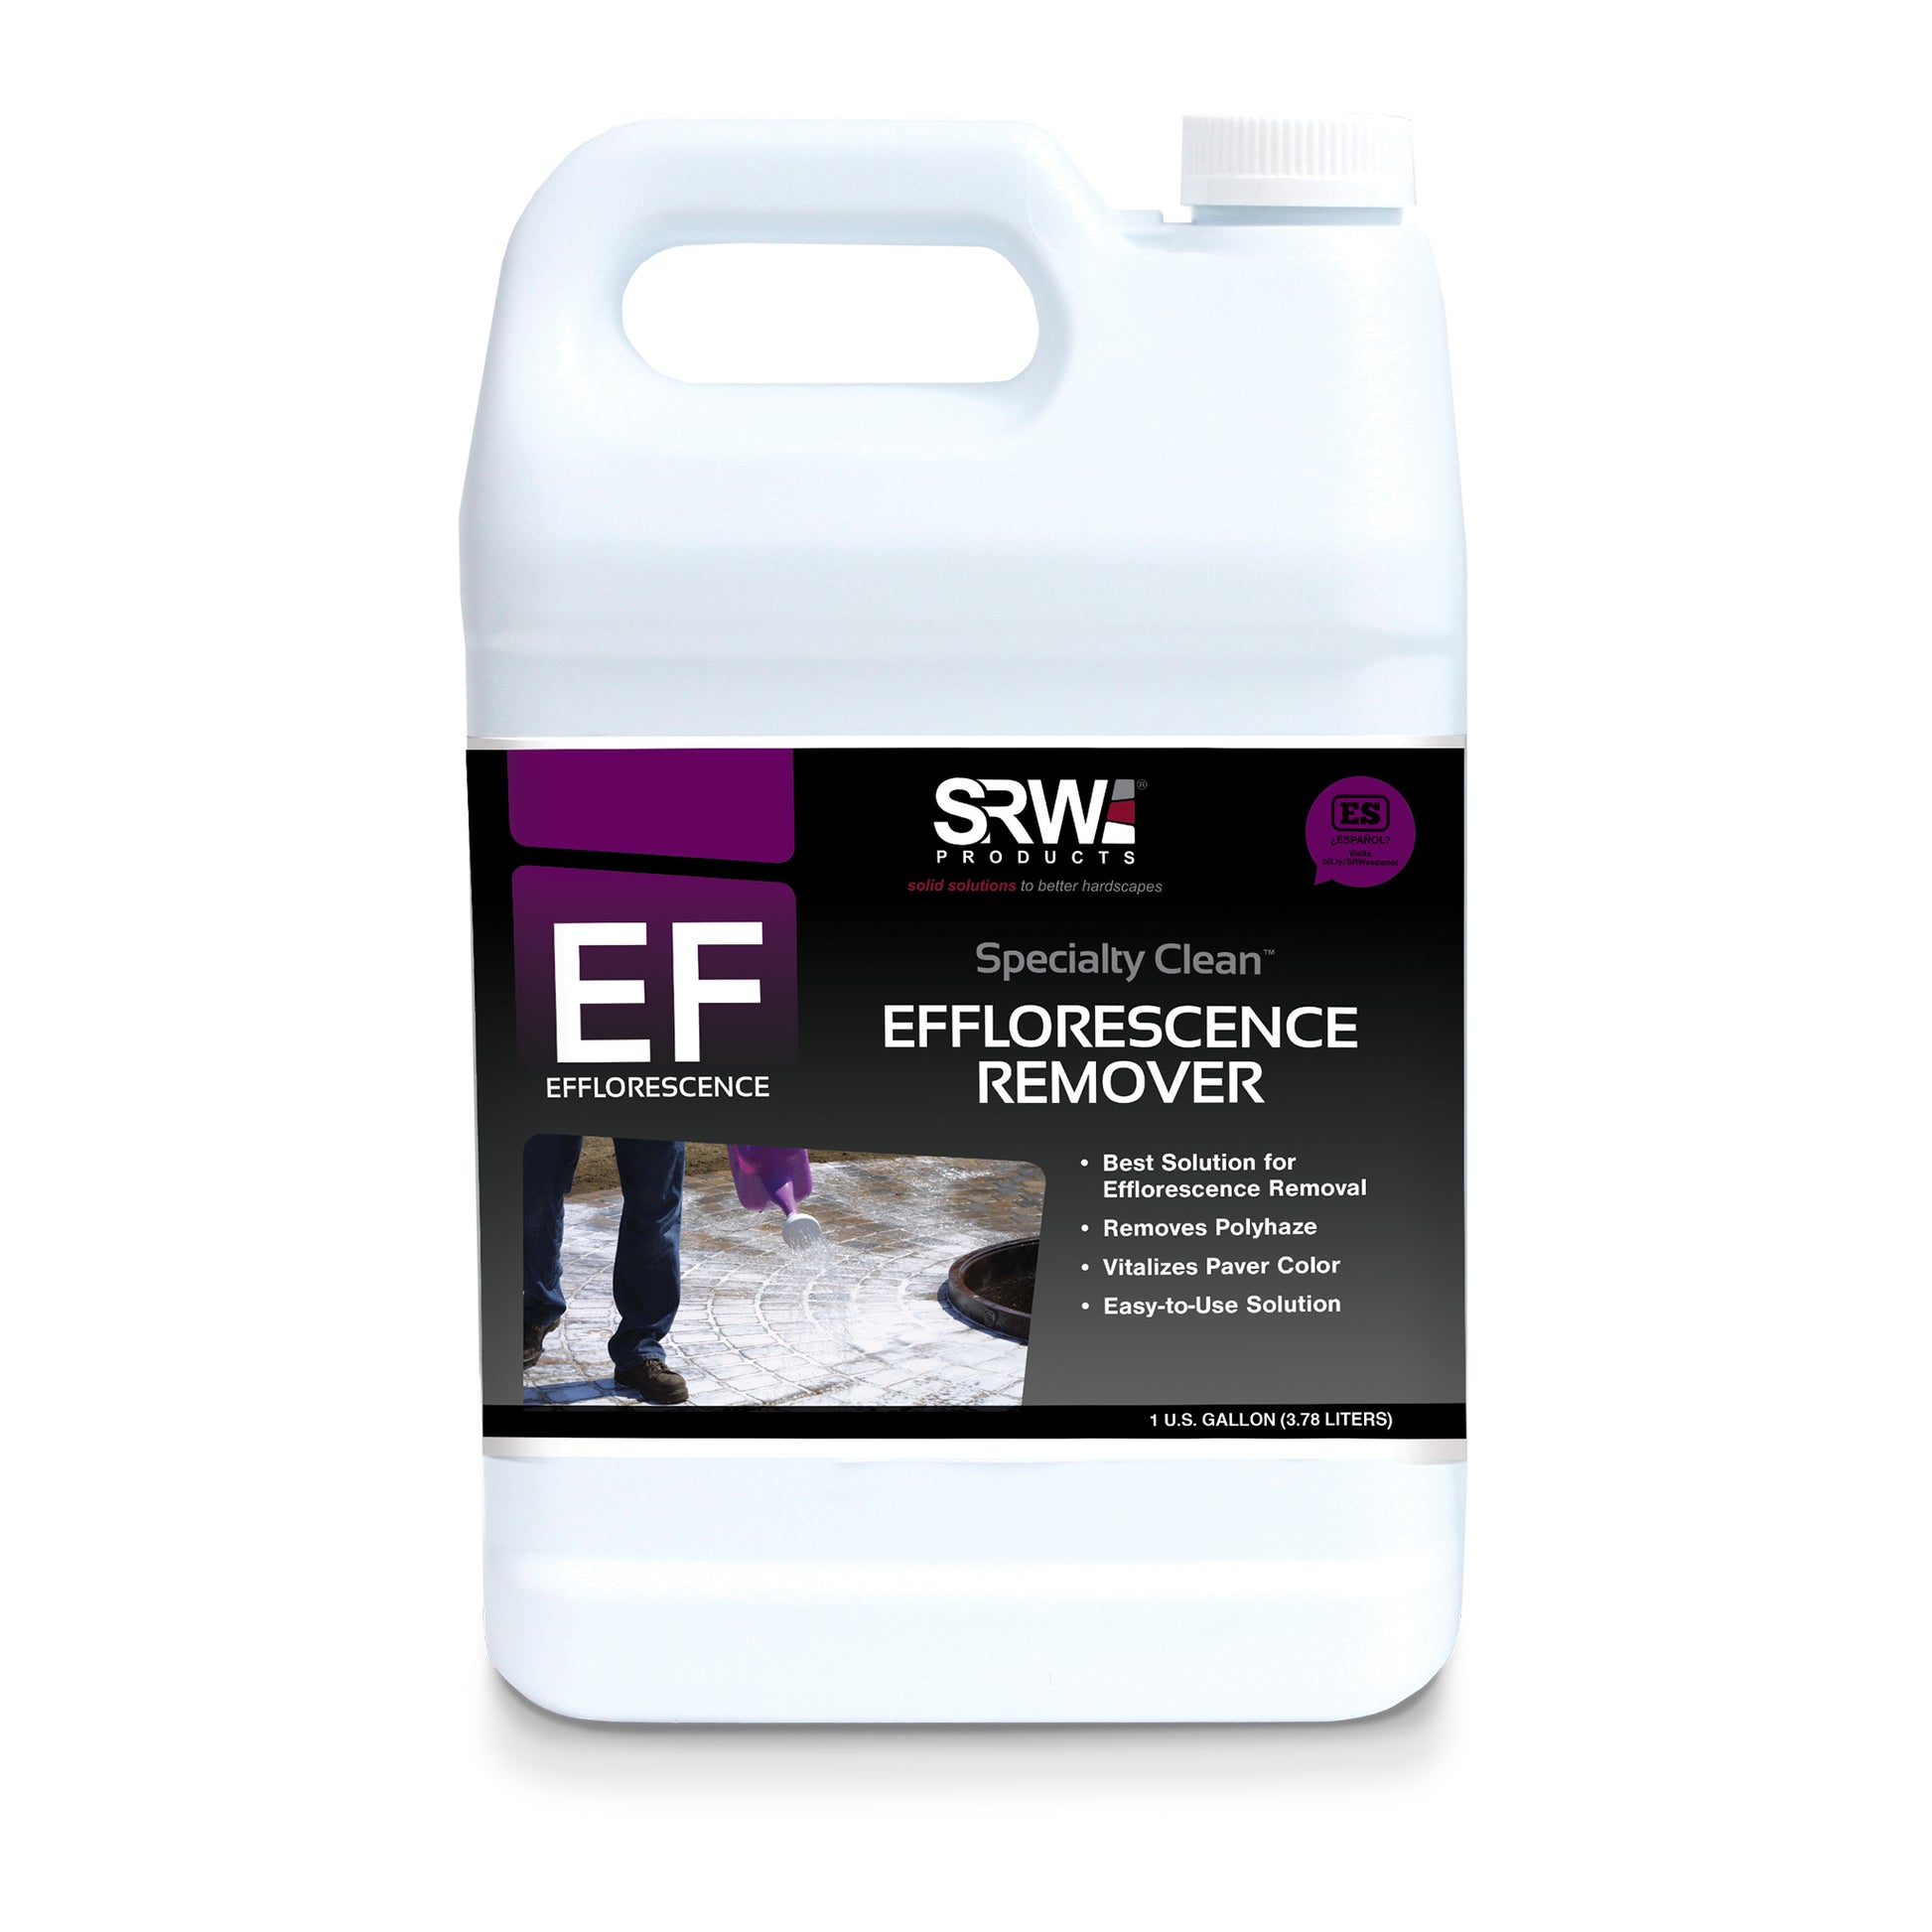 SRW Products EF Efflorescence Remover - Specialty Clean™